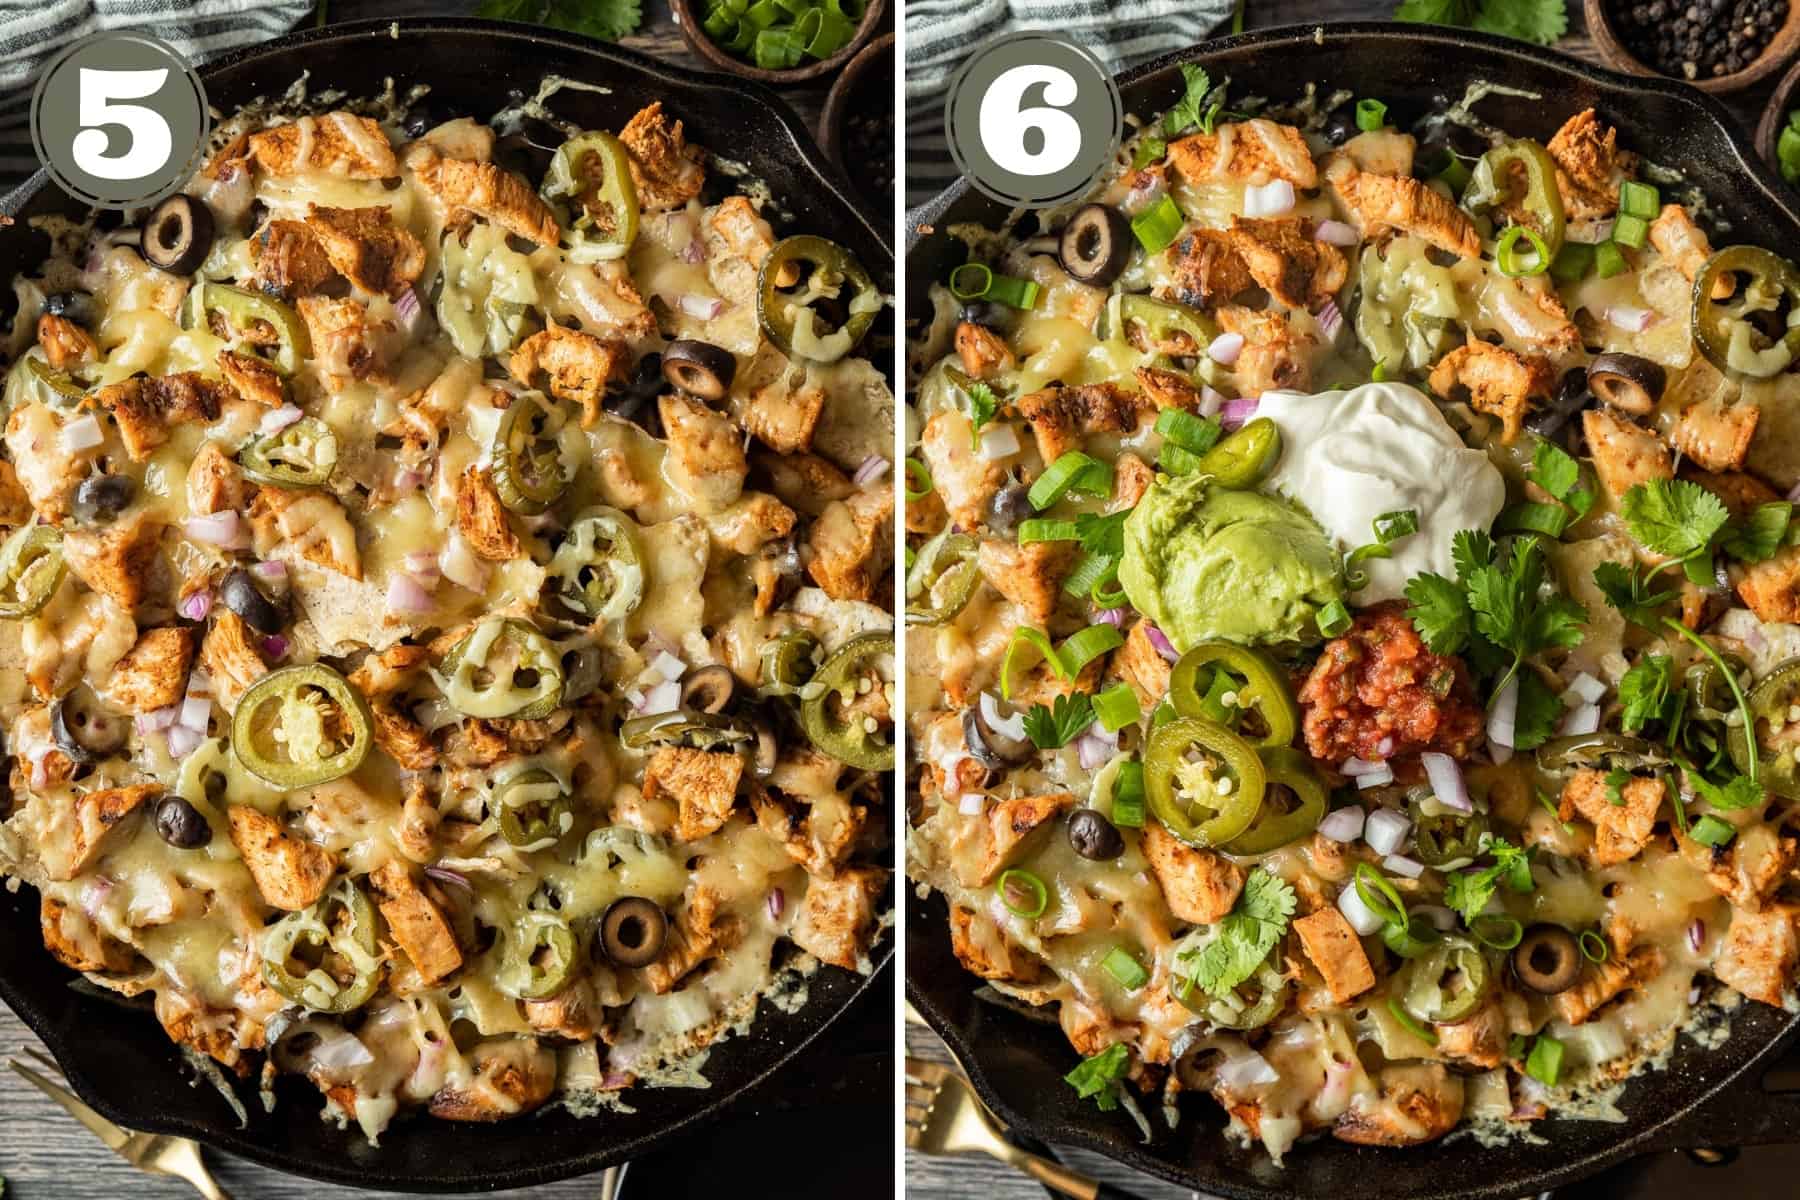 A split photo showing cooked nachos in a cast iron and the nachos topped with sour cream, guacamole, and salsa.